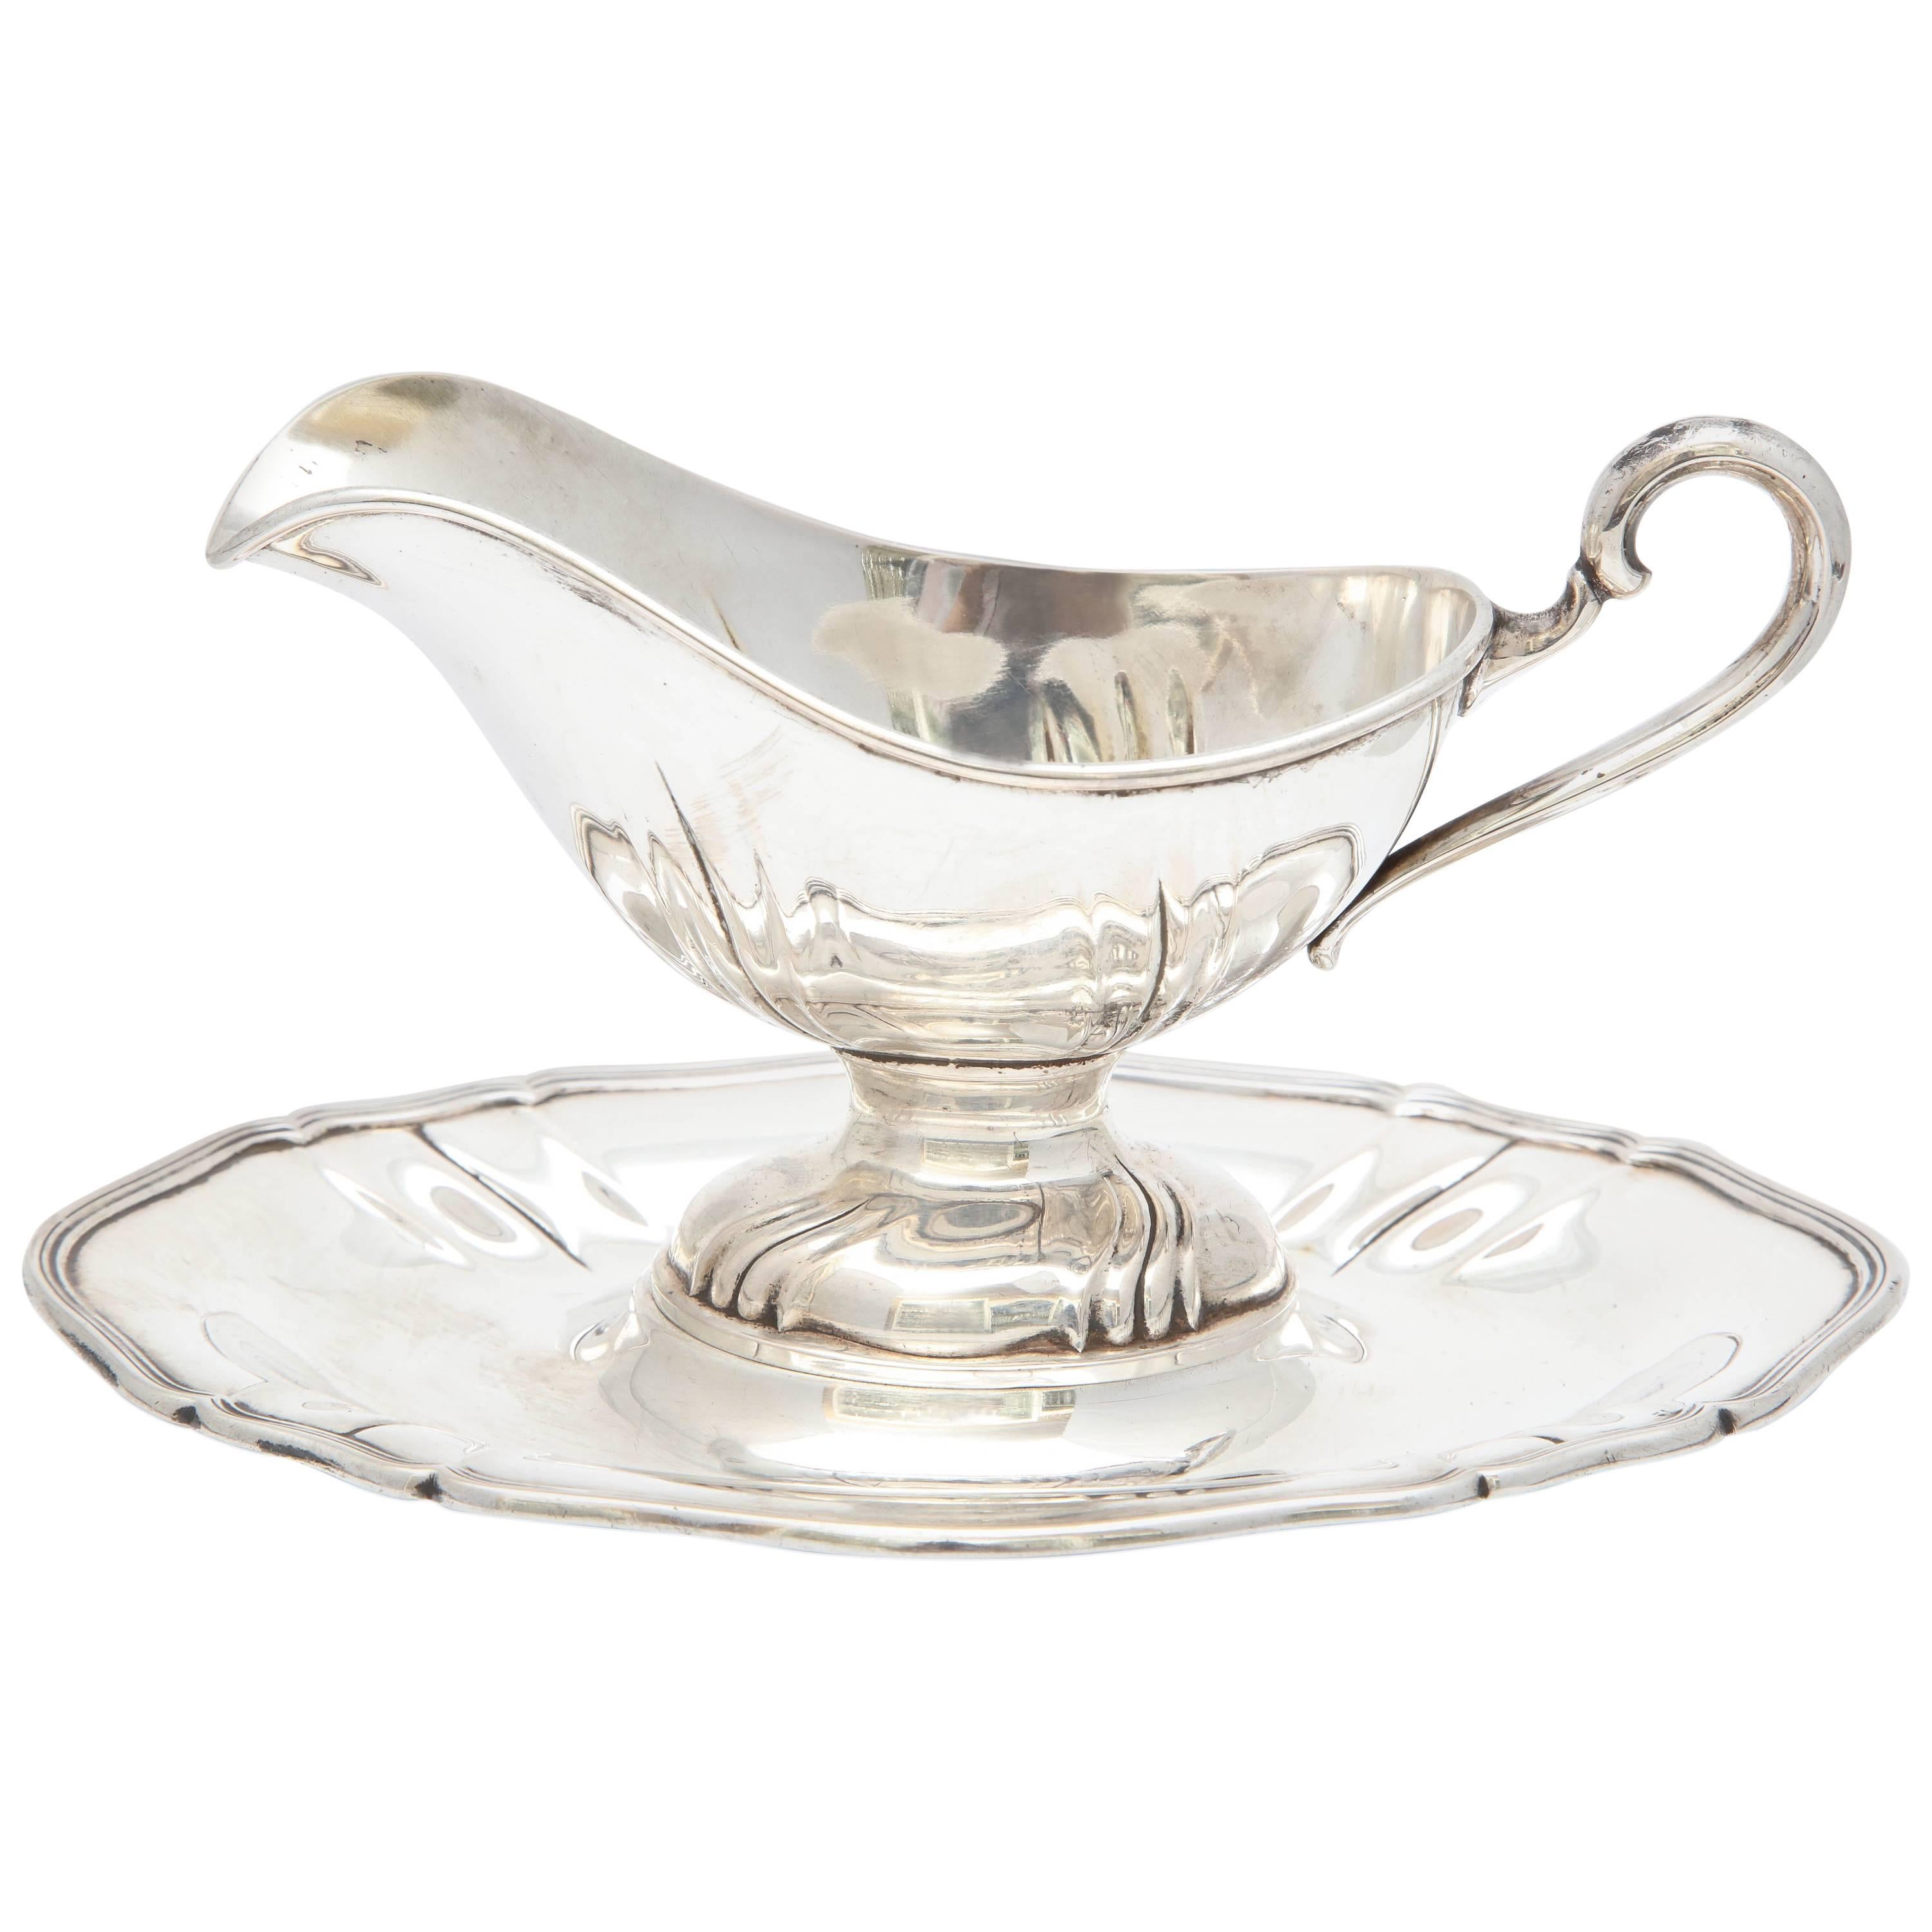 Continental Silver '.800' Victorian Style Sauce/Gravy Boat on Attached Tray